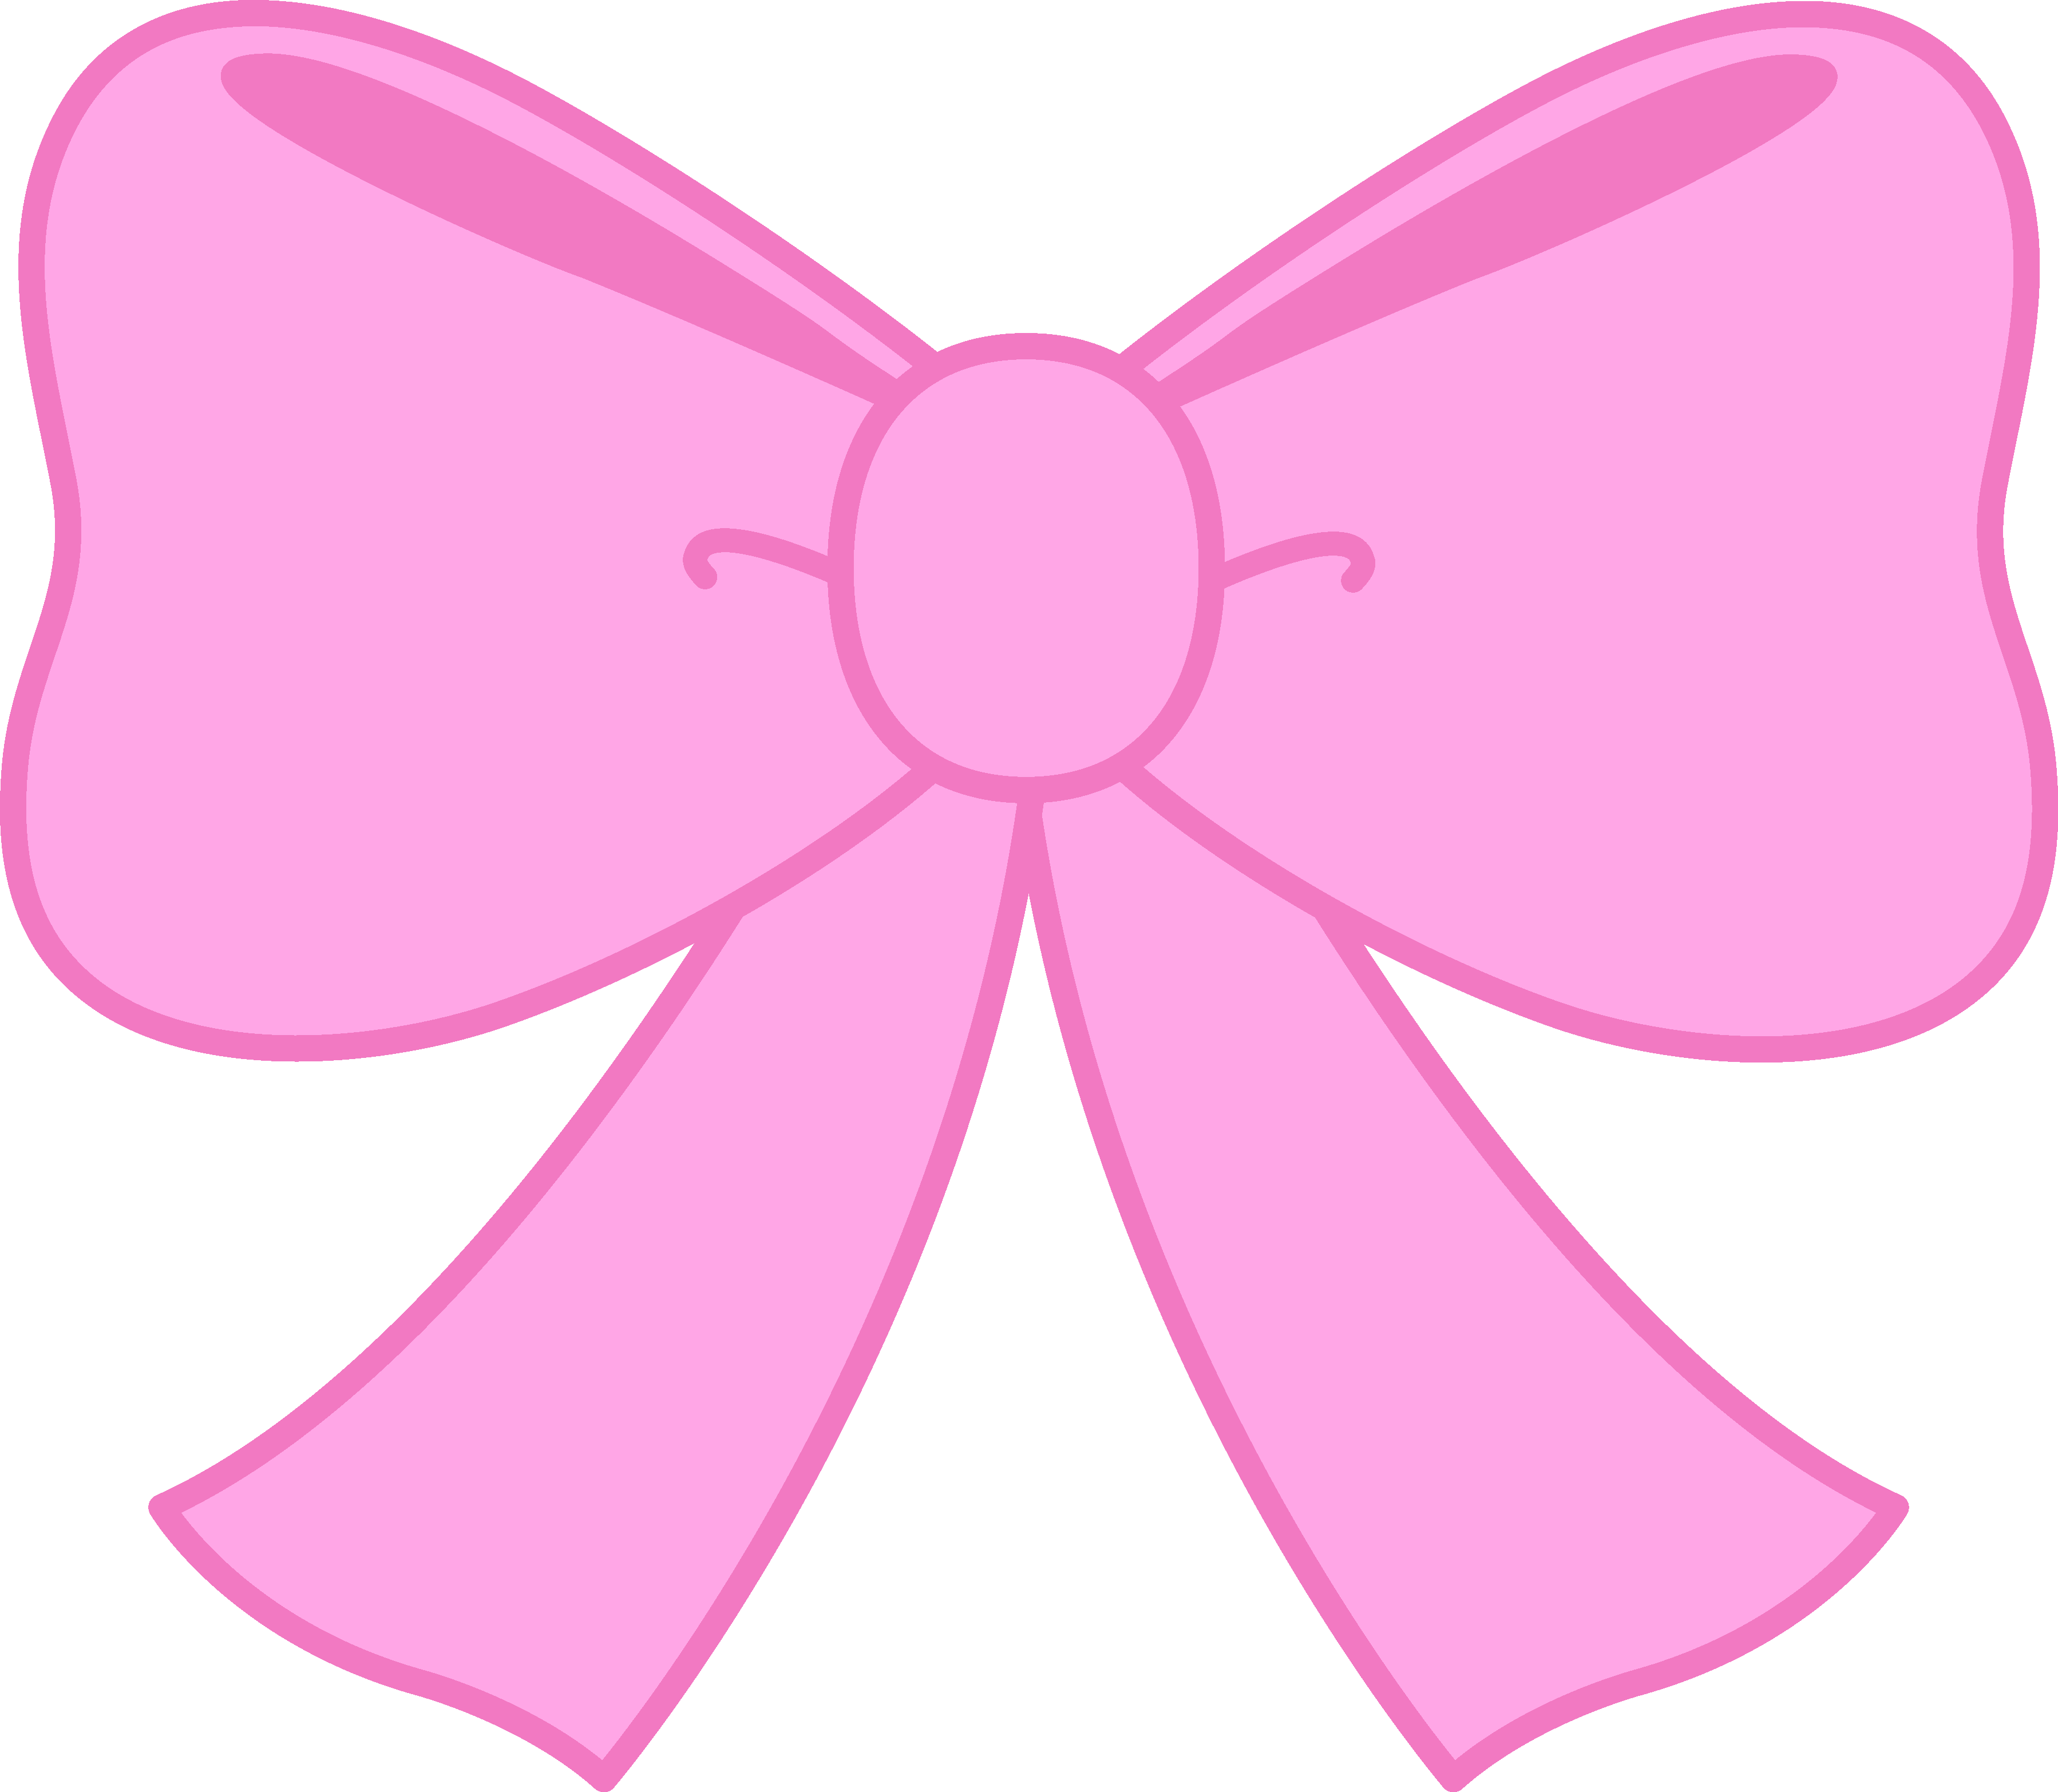 Related image bow.